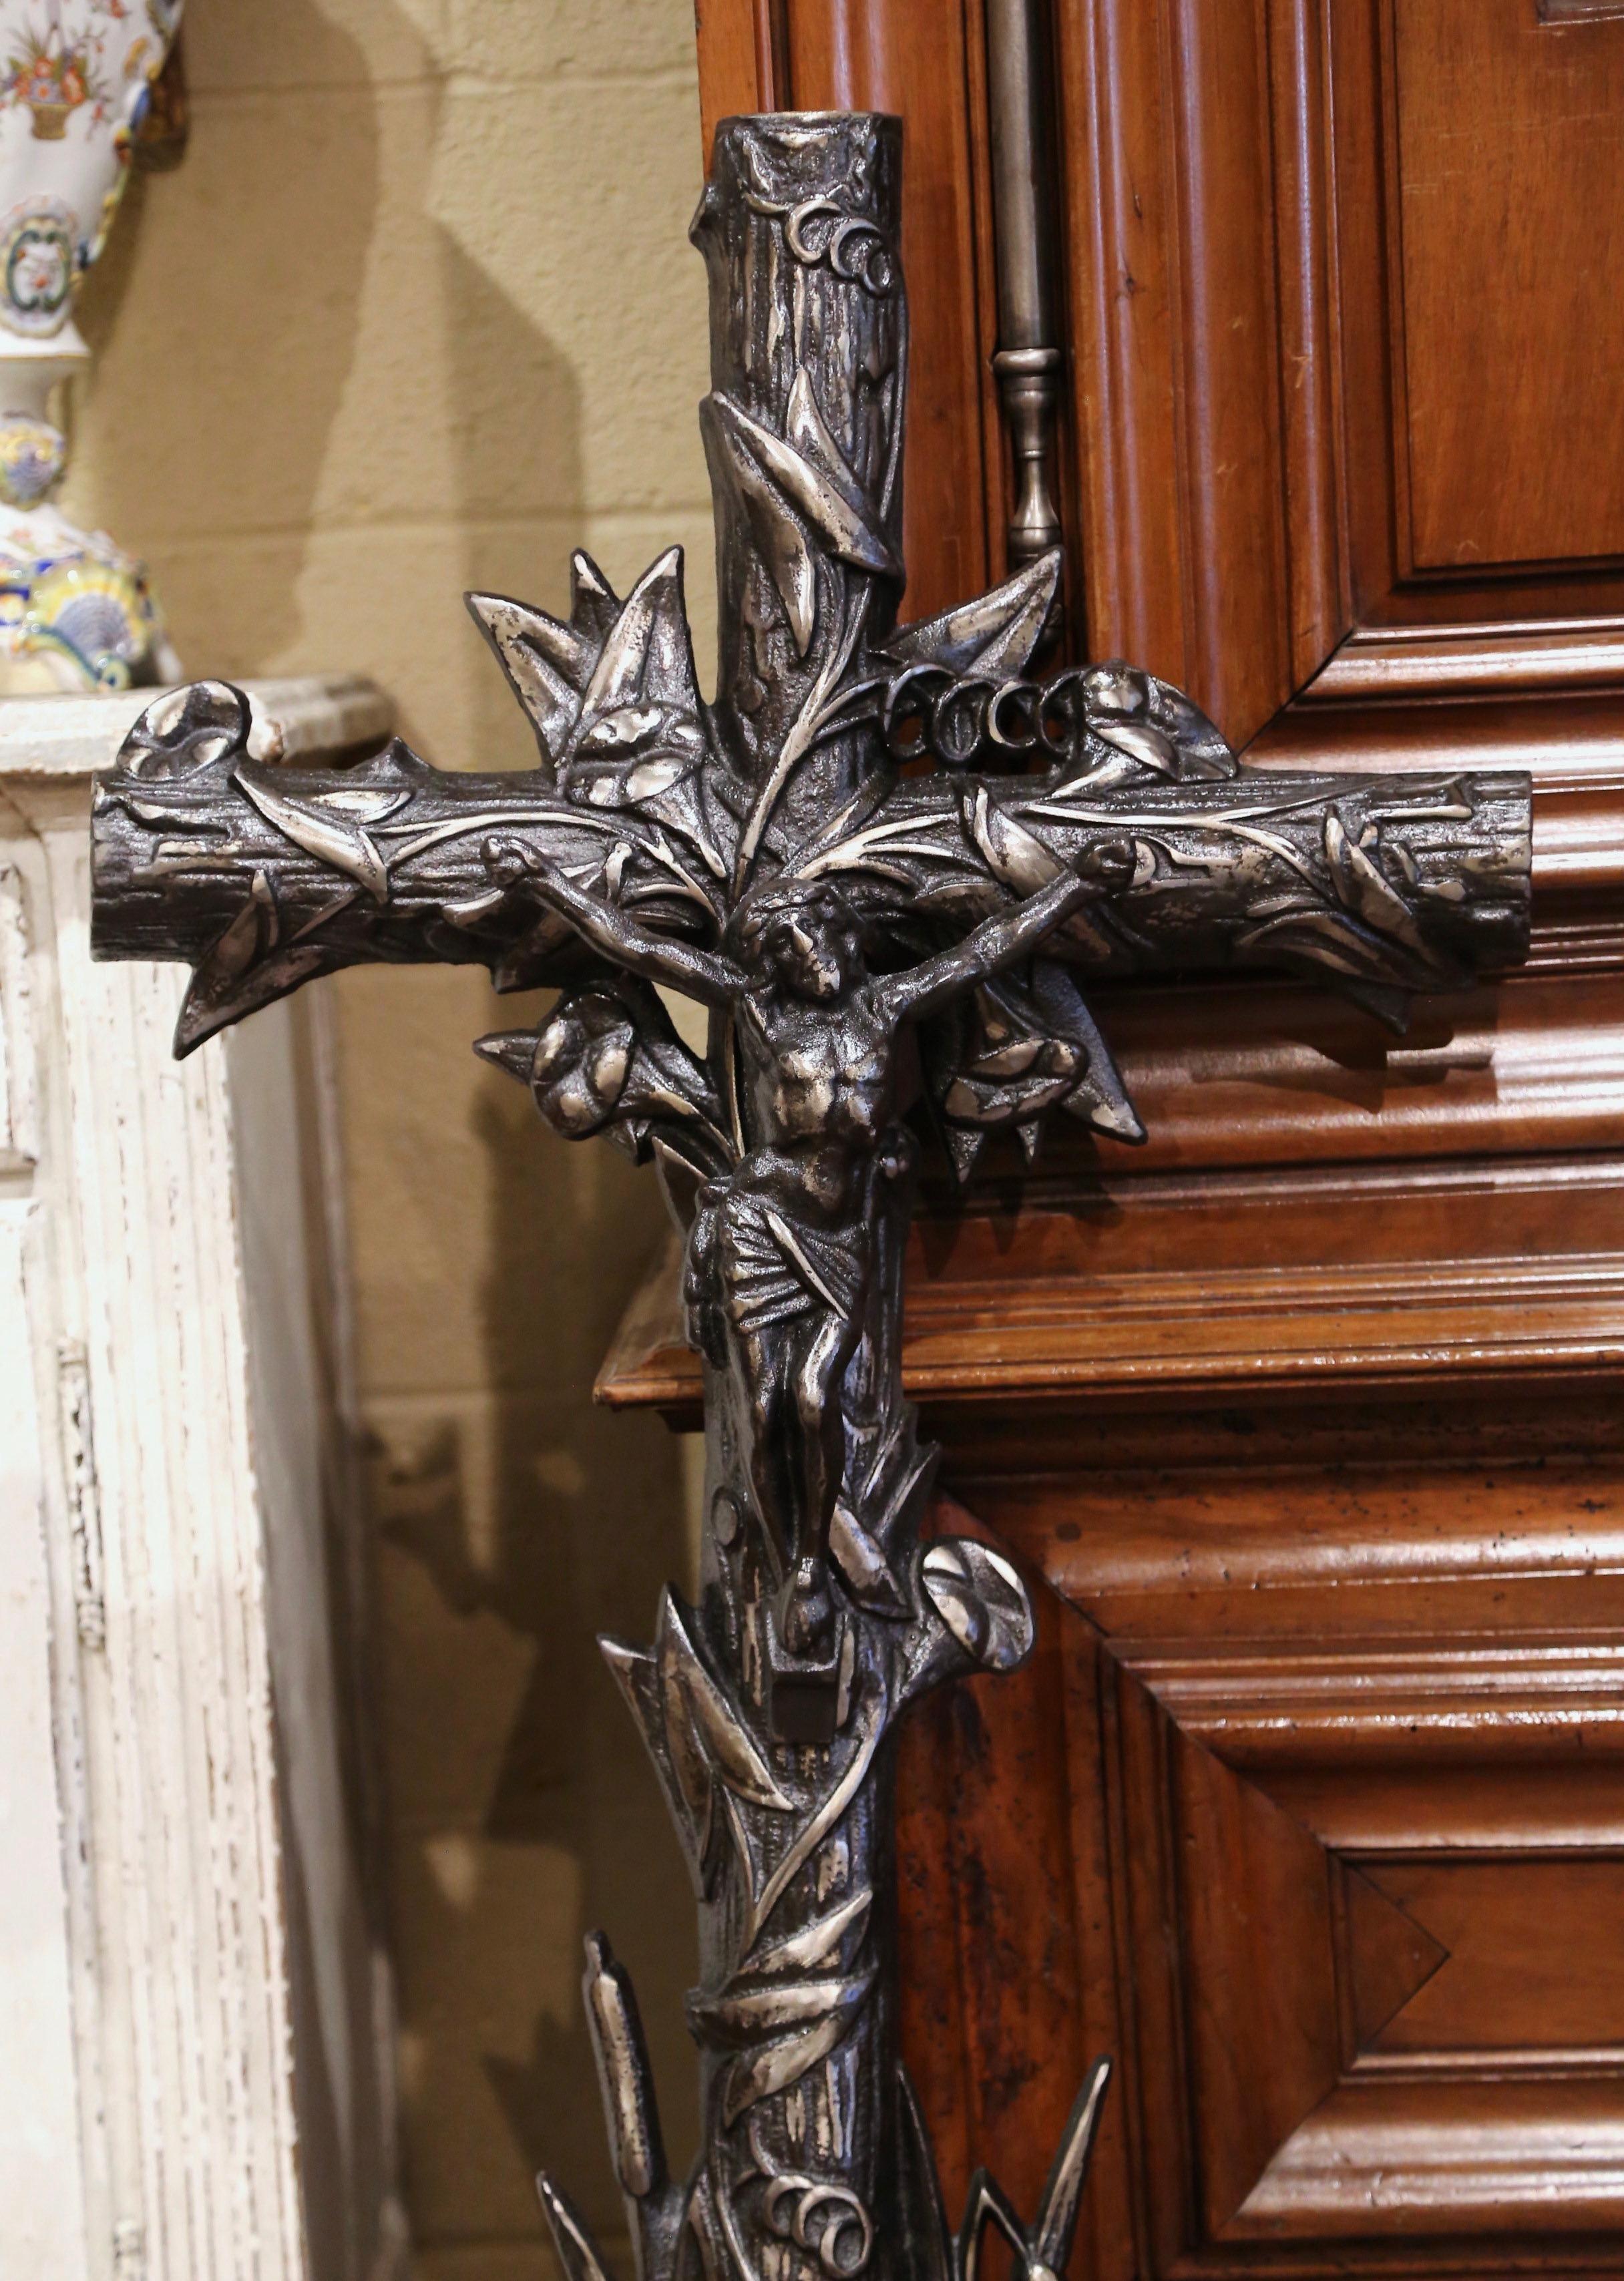 Mid-19th Century French Polished Iron Garden Crucifix Cross with Floral Motifs In Excellent Condition For Sale In Dallas, TX